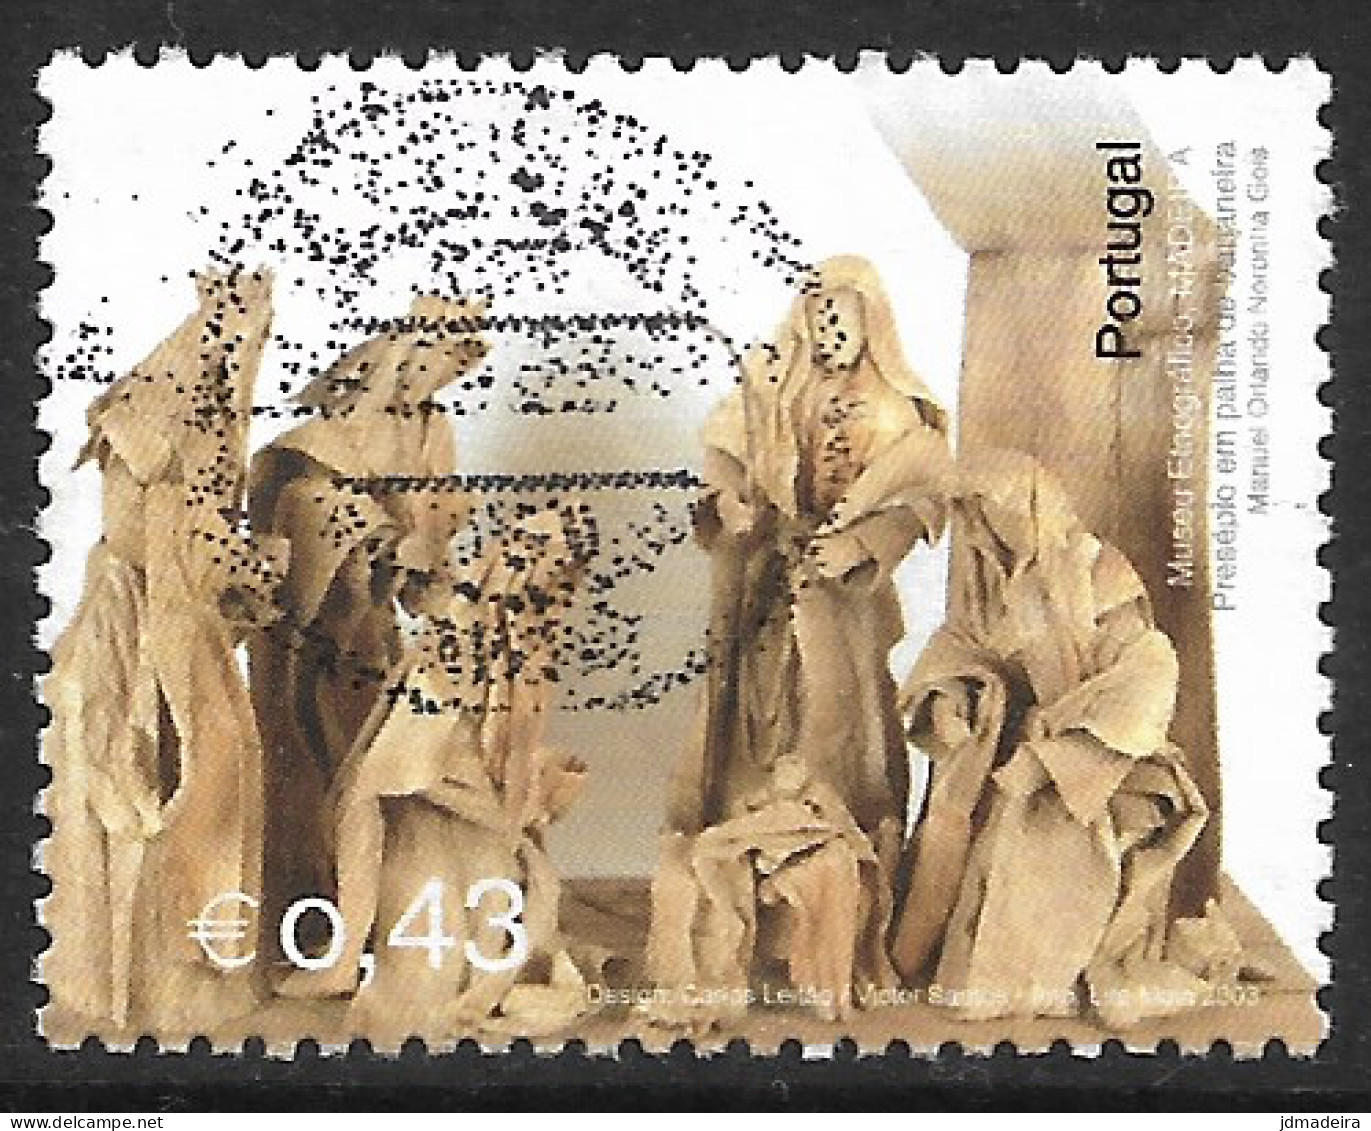 Portugal – 2003 Madeira Museums 0,43 Used Stamp - Oblitérés